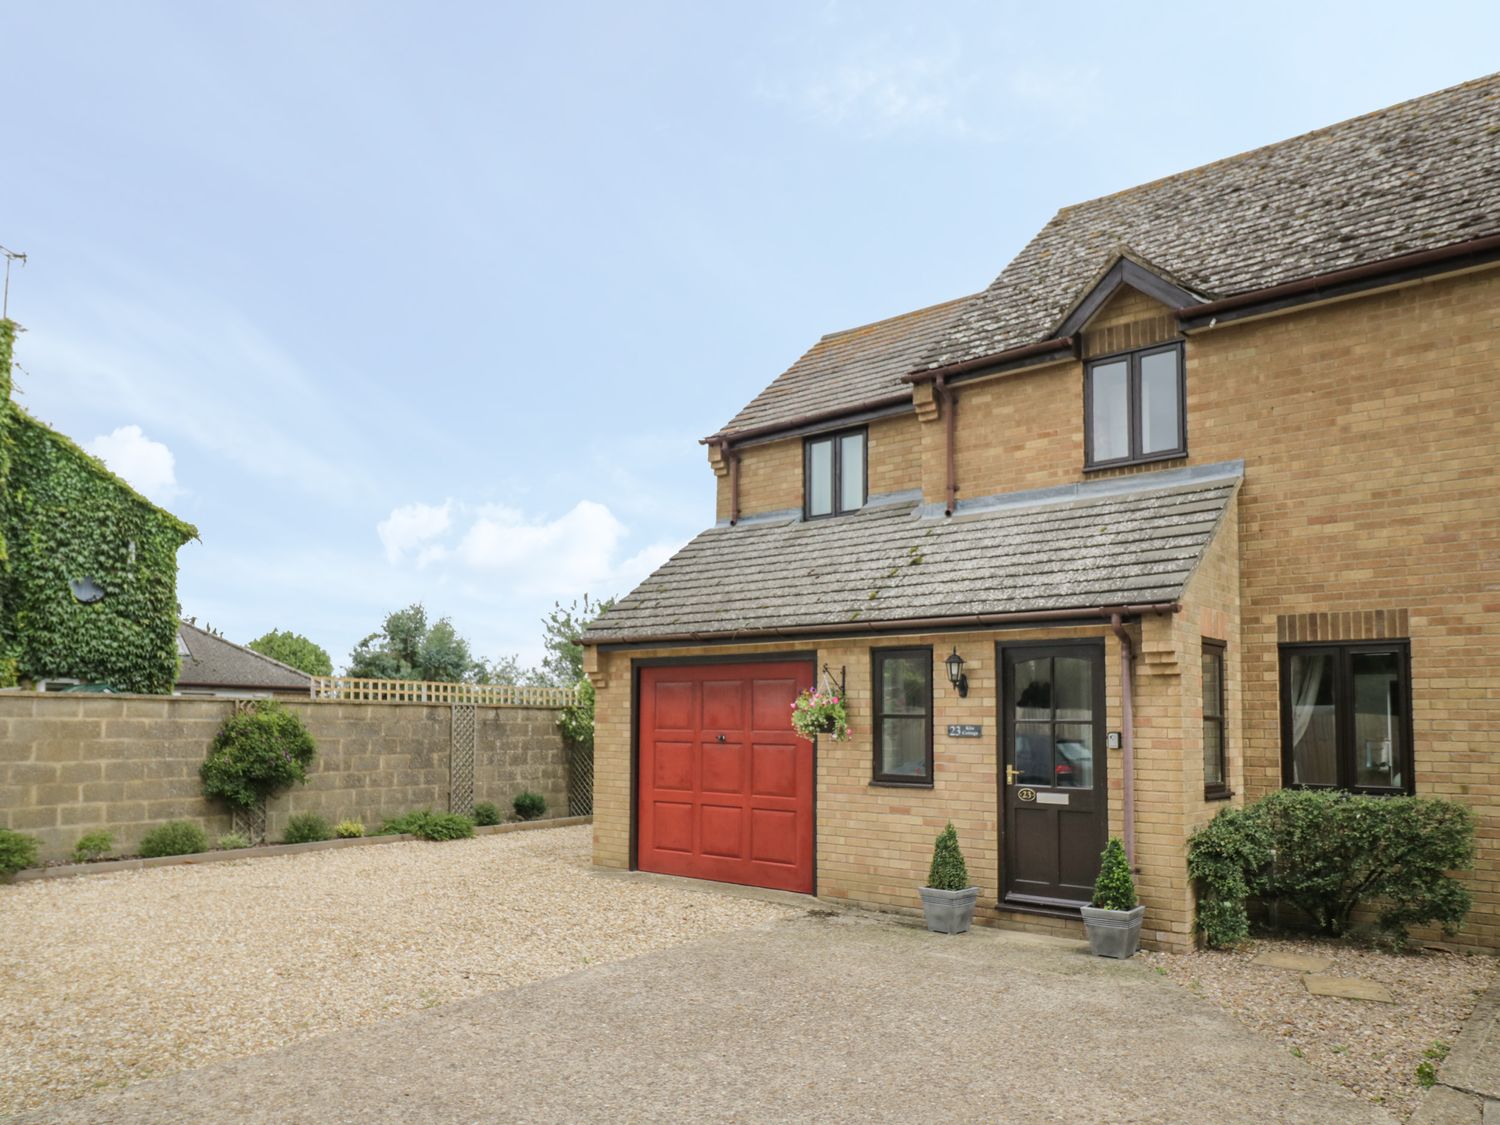 Kite Cottage - Cotswolds - 1022221 - photo 1